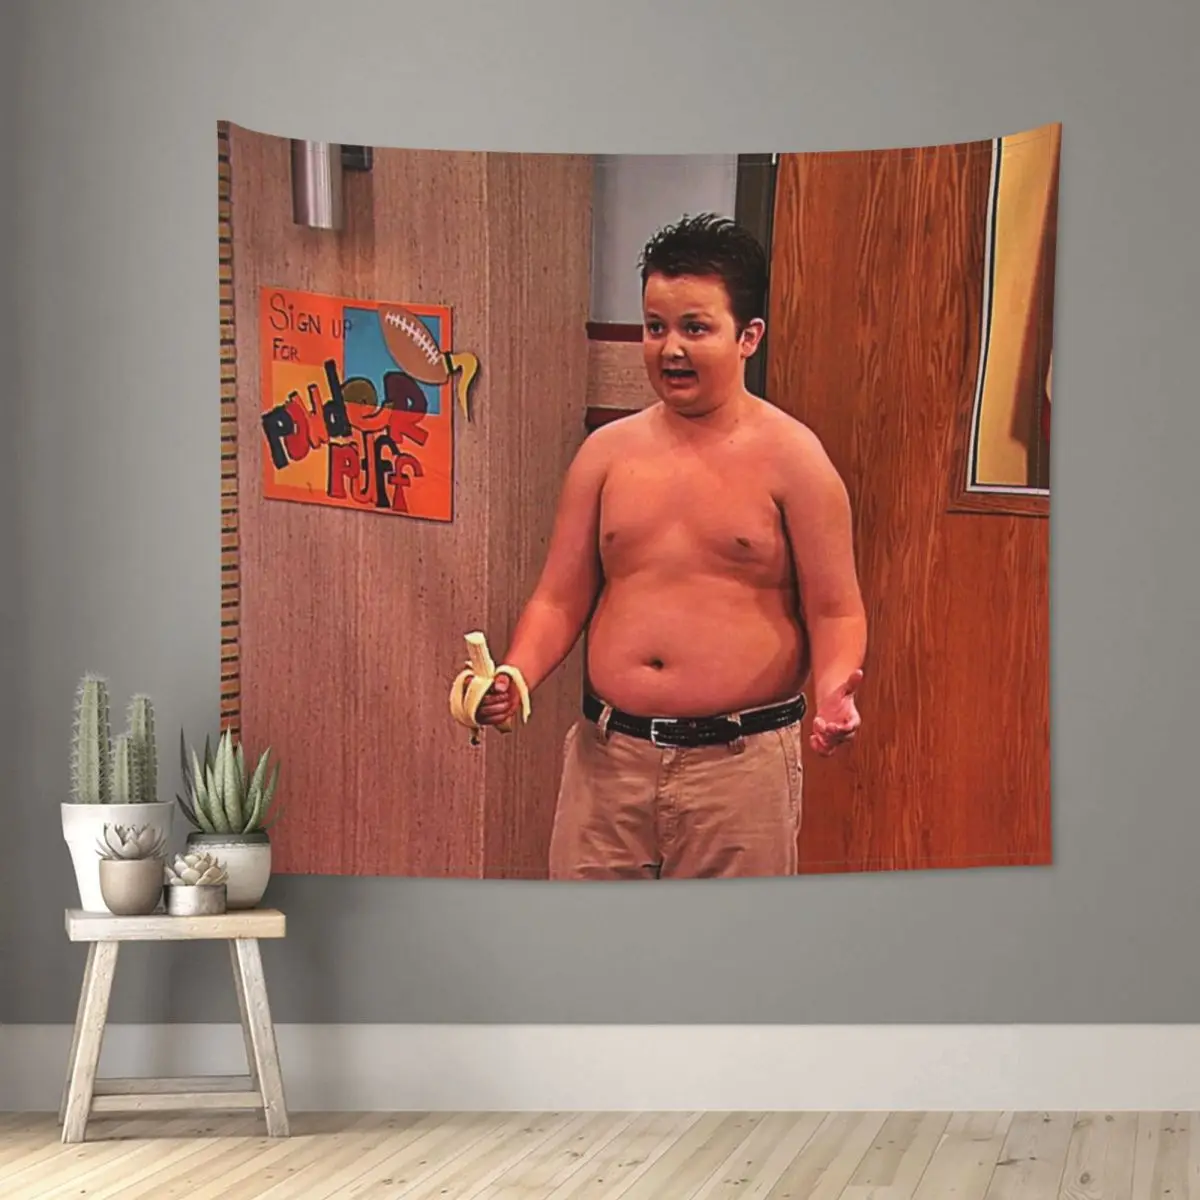 

Gibby From ICarly Meme Tapestry Bohemian Fabric Wall Hanging Home Decor Table Cover Psychedelic Tapestries